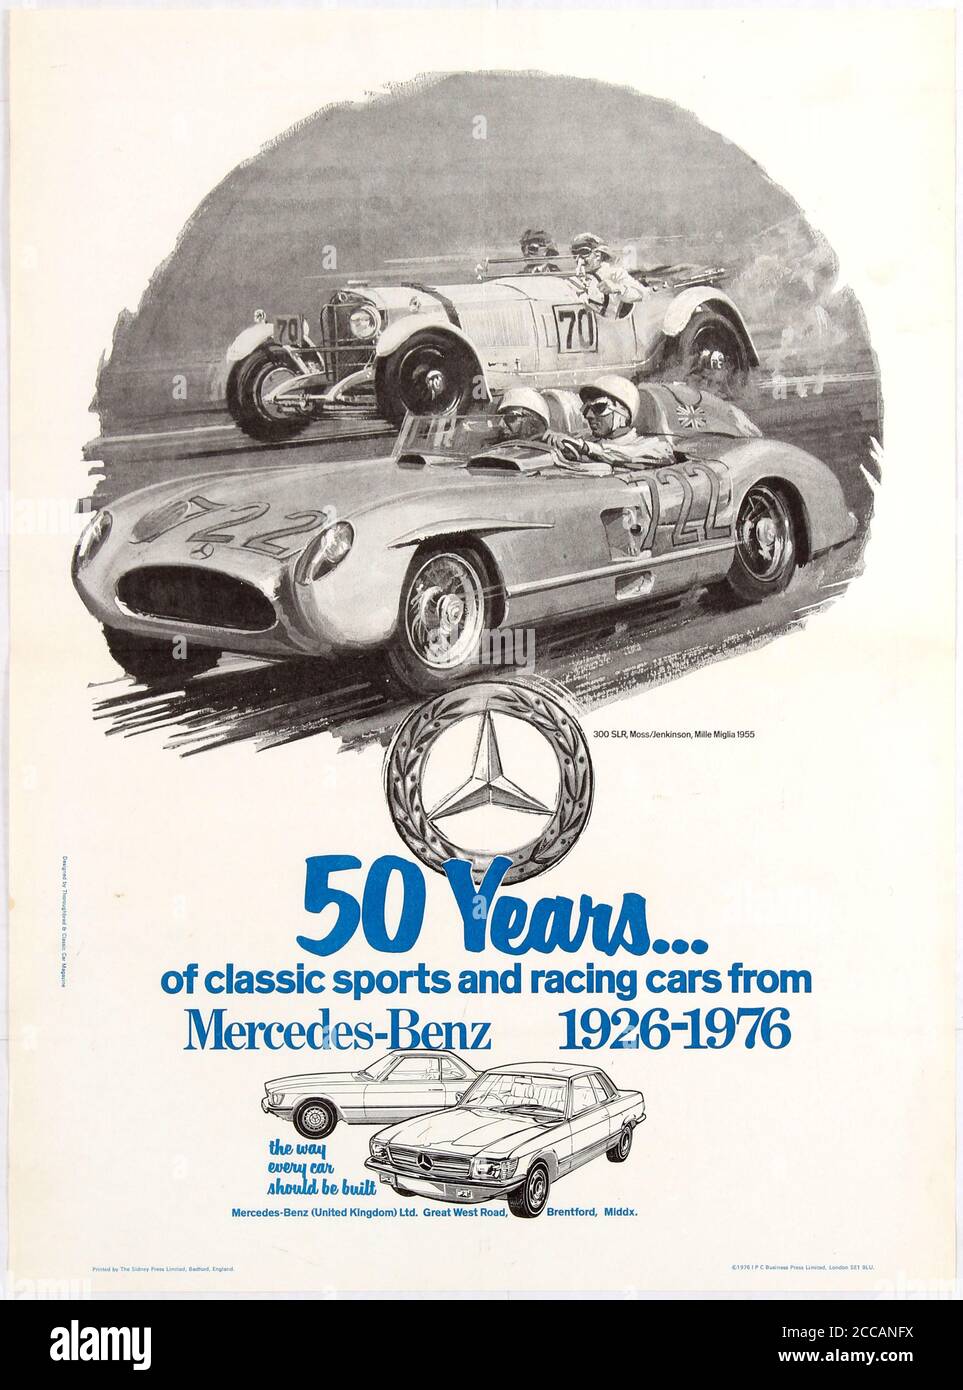 Poster for the 50 years anniversary of classic sports and racing cars from  Mercedes-Benz. Museum: PRIVATE COLLECTION. Author: ANONYMOUS Stock Photo -  Alamy